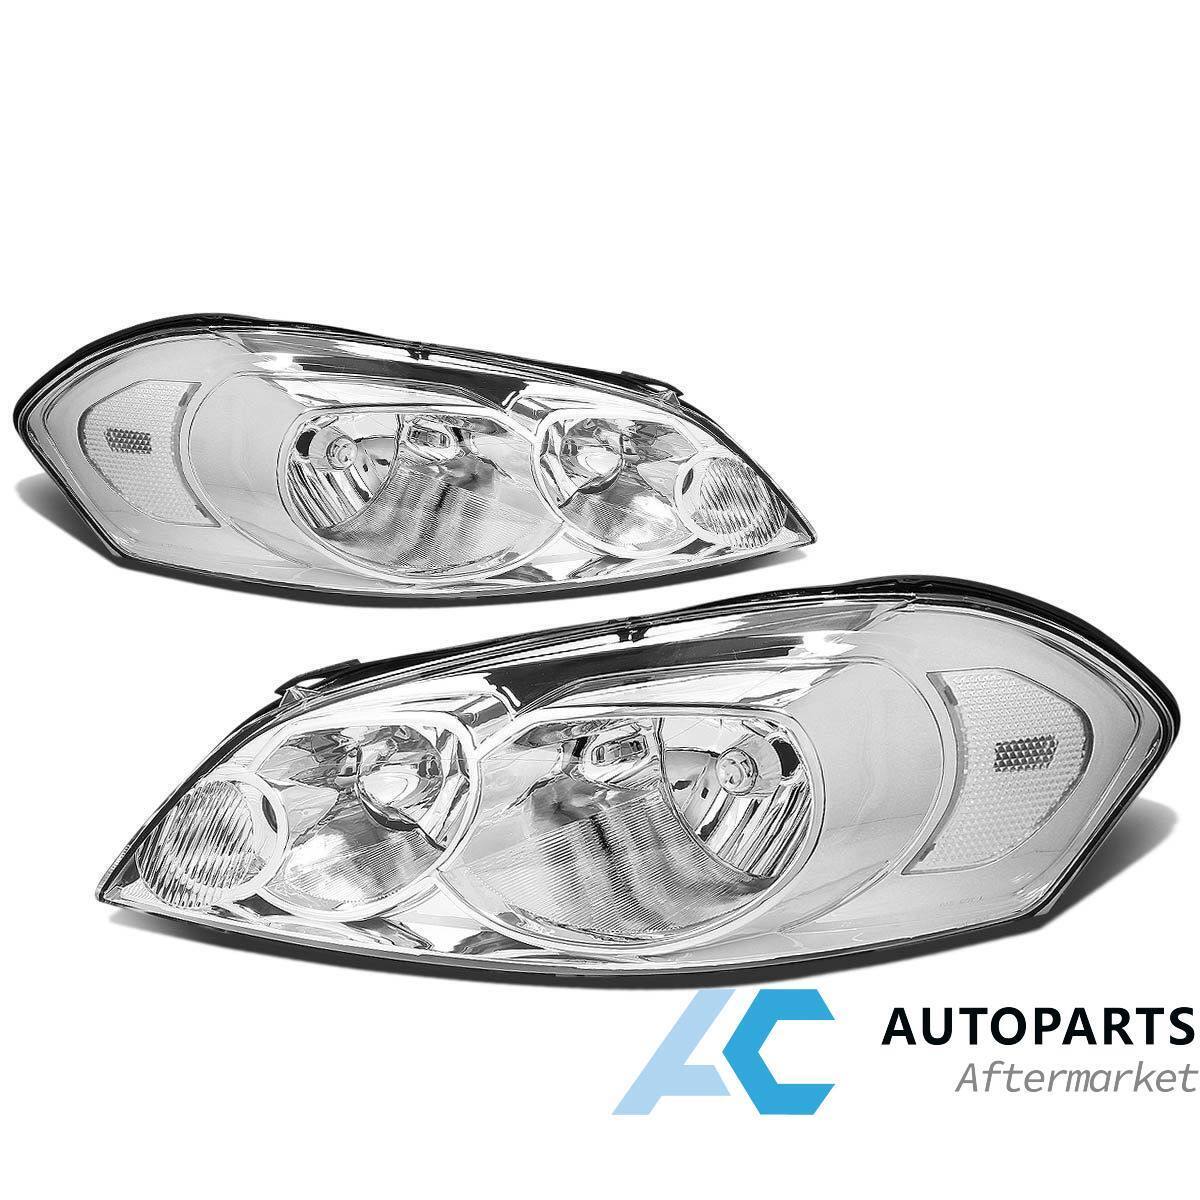 For 06-12 Chevy Impala / 06-07 Monte Carlo Crystal Headlights Clear Reflector